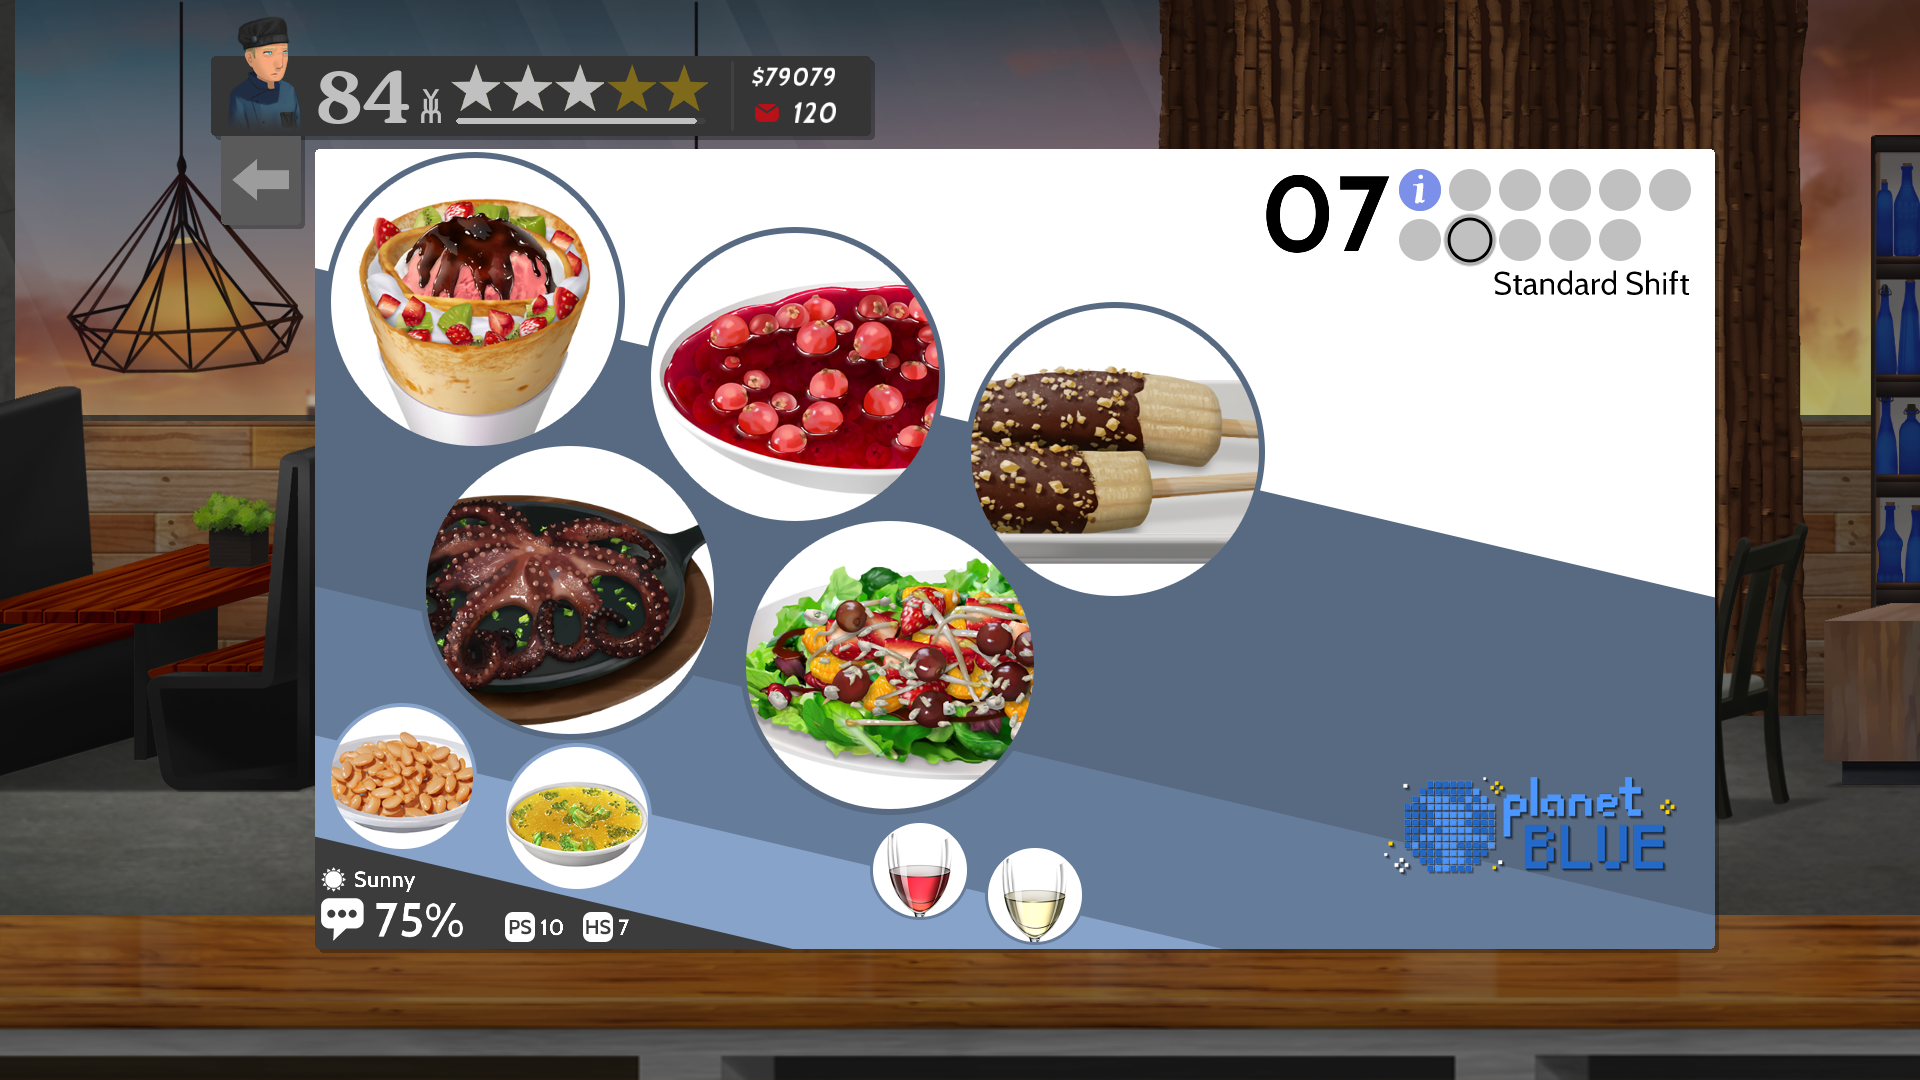 cook serve delicious 2 cheat table